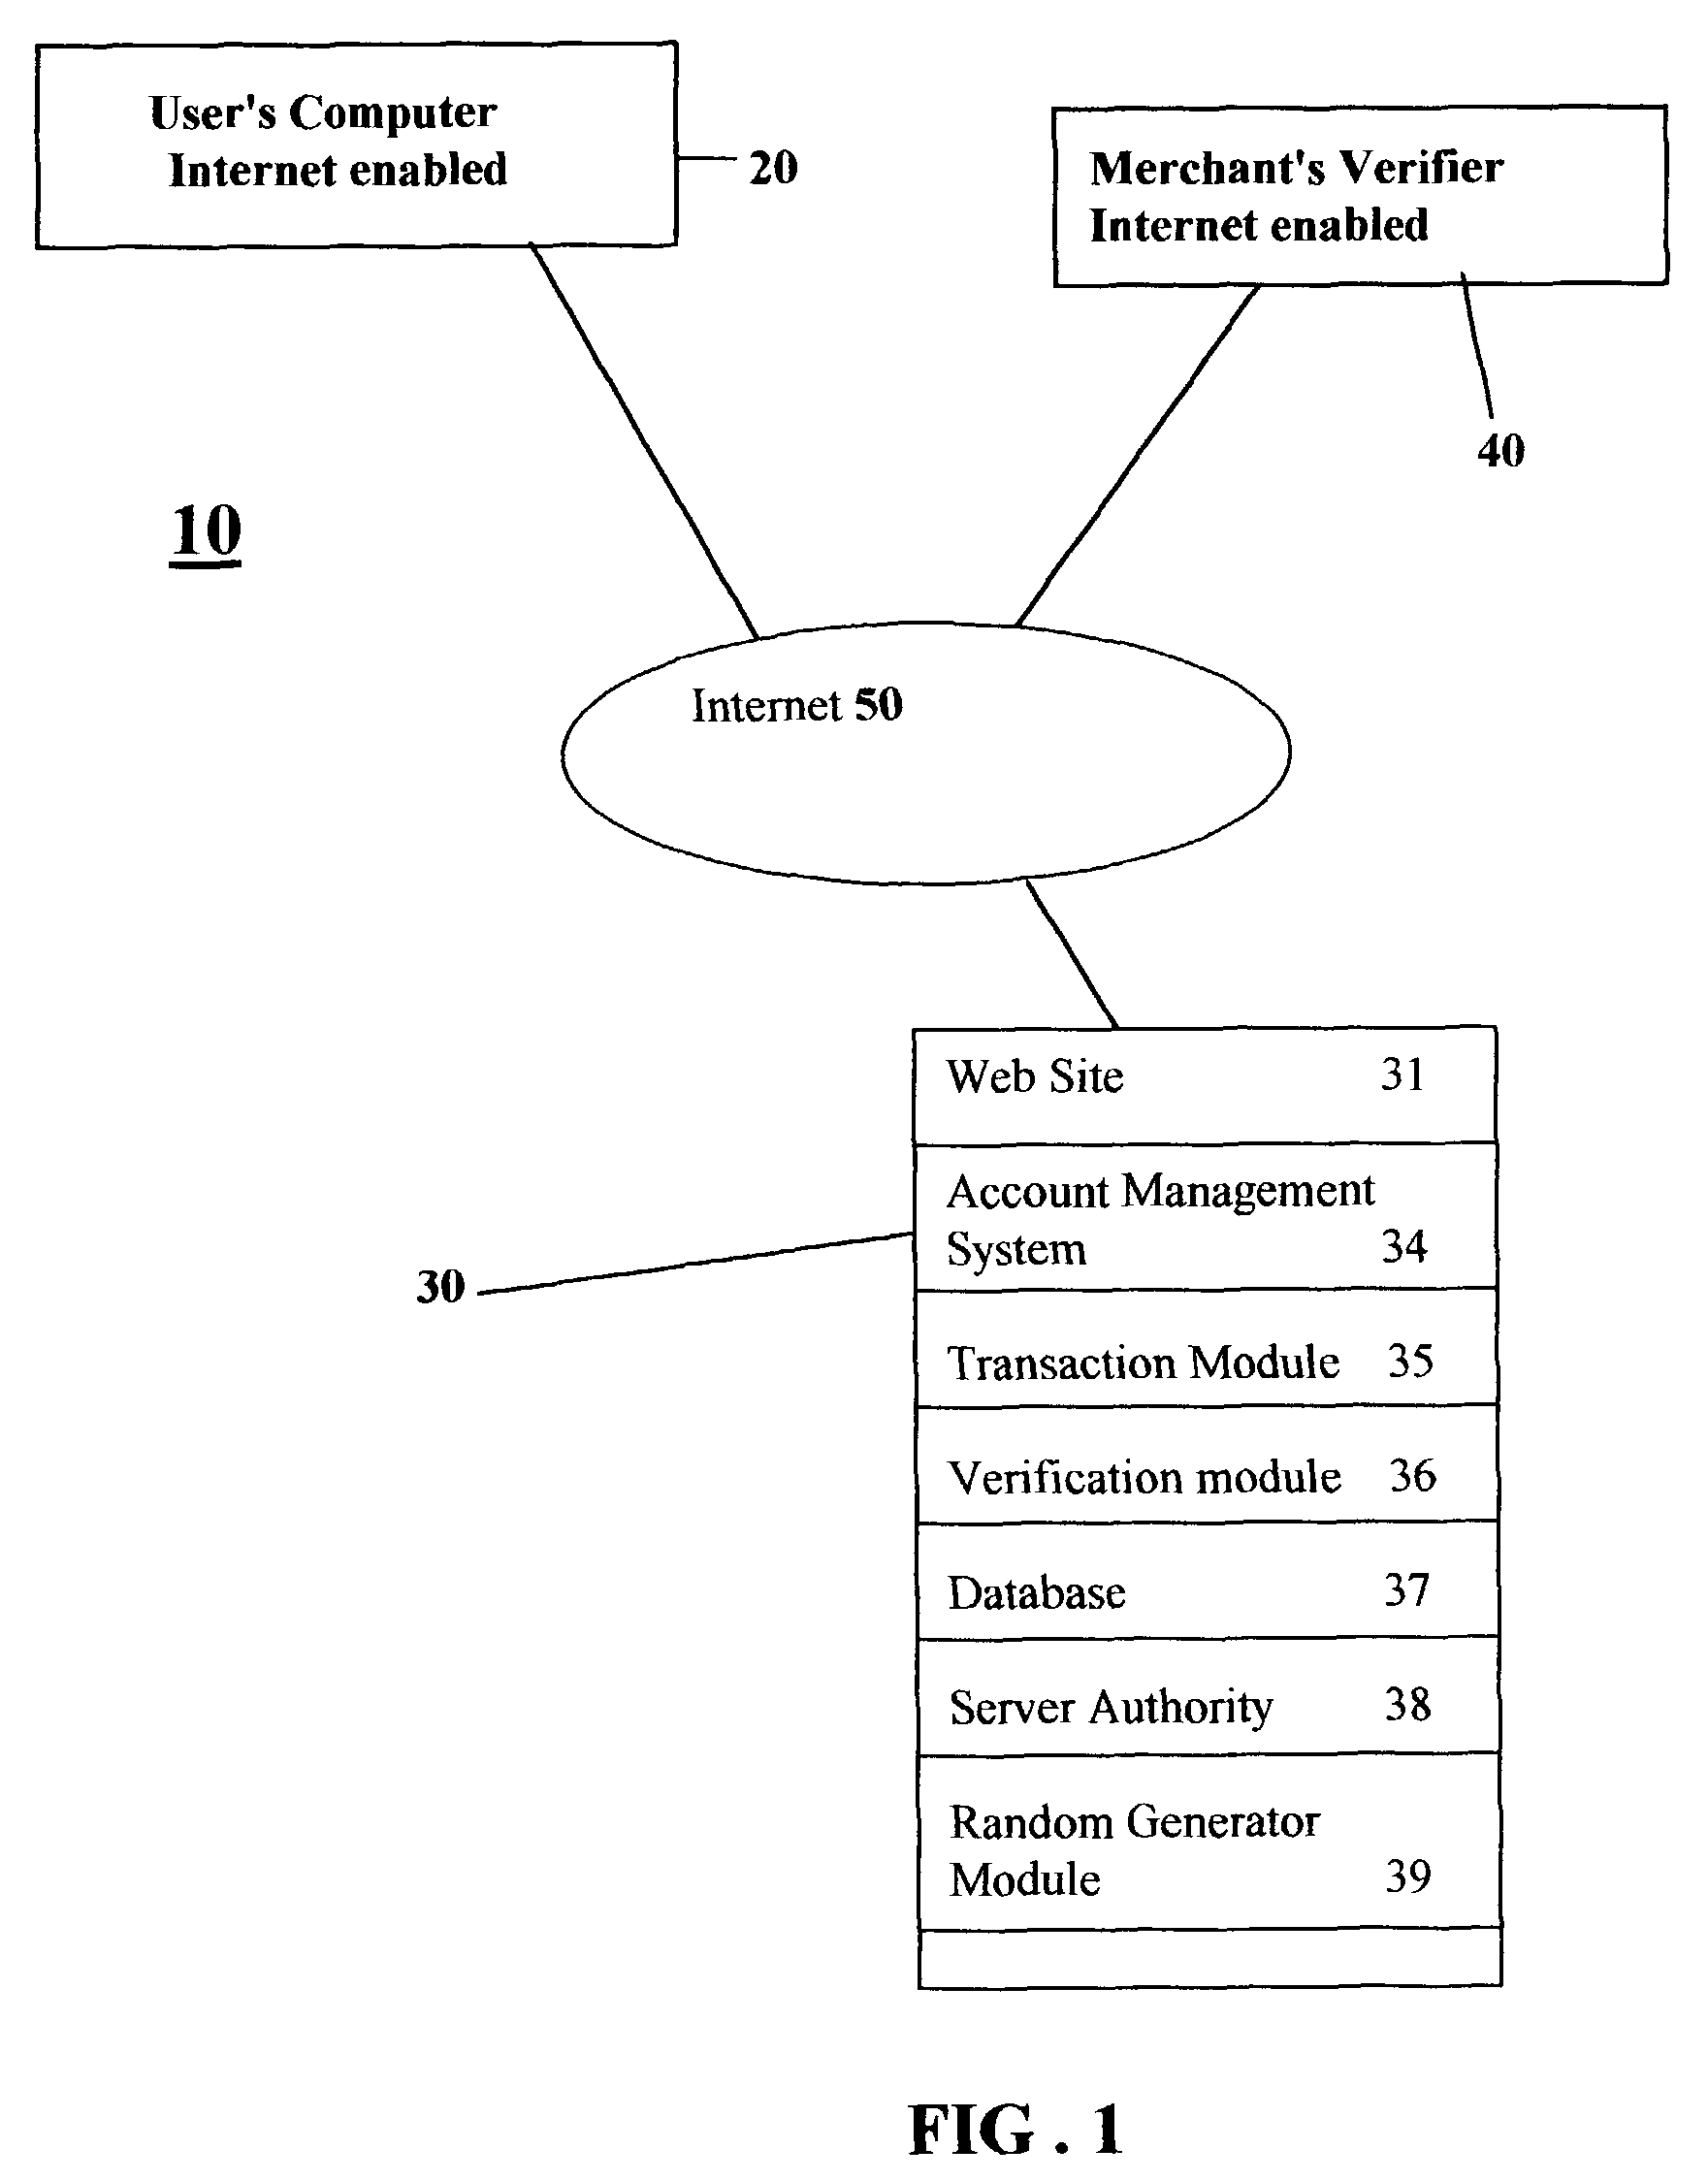 Computer program, system and method for on-line issuing and verifying a representation of economic value interchangeable for money having identification data and password protection over a computer network